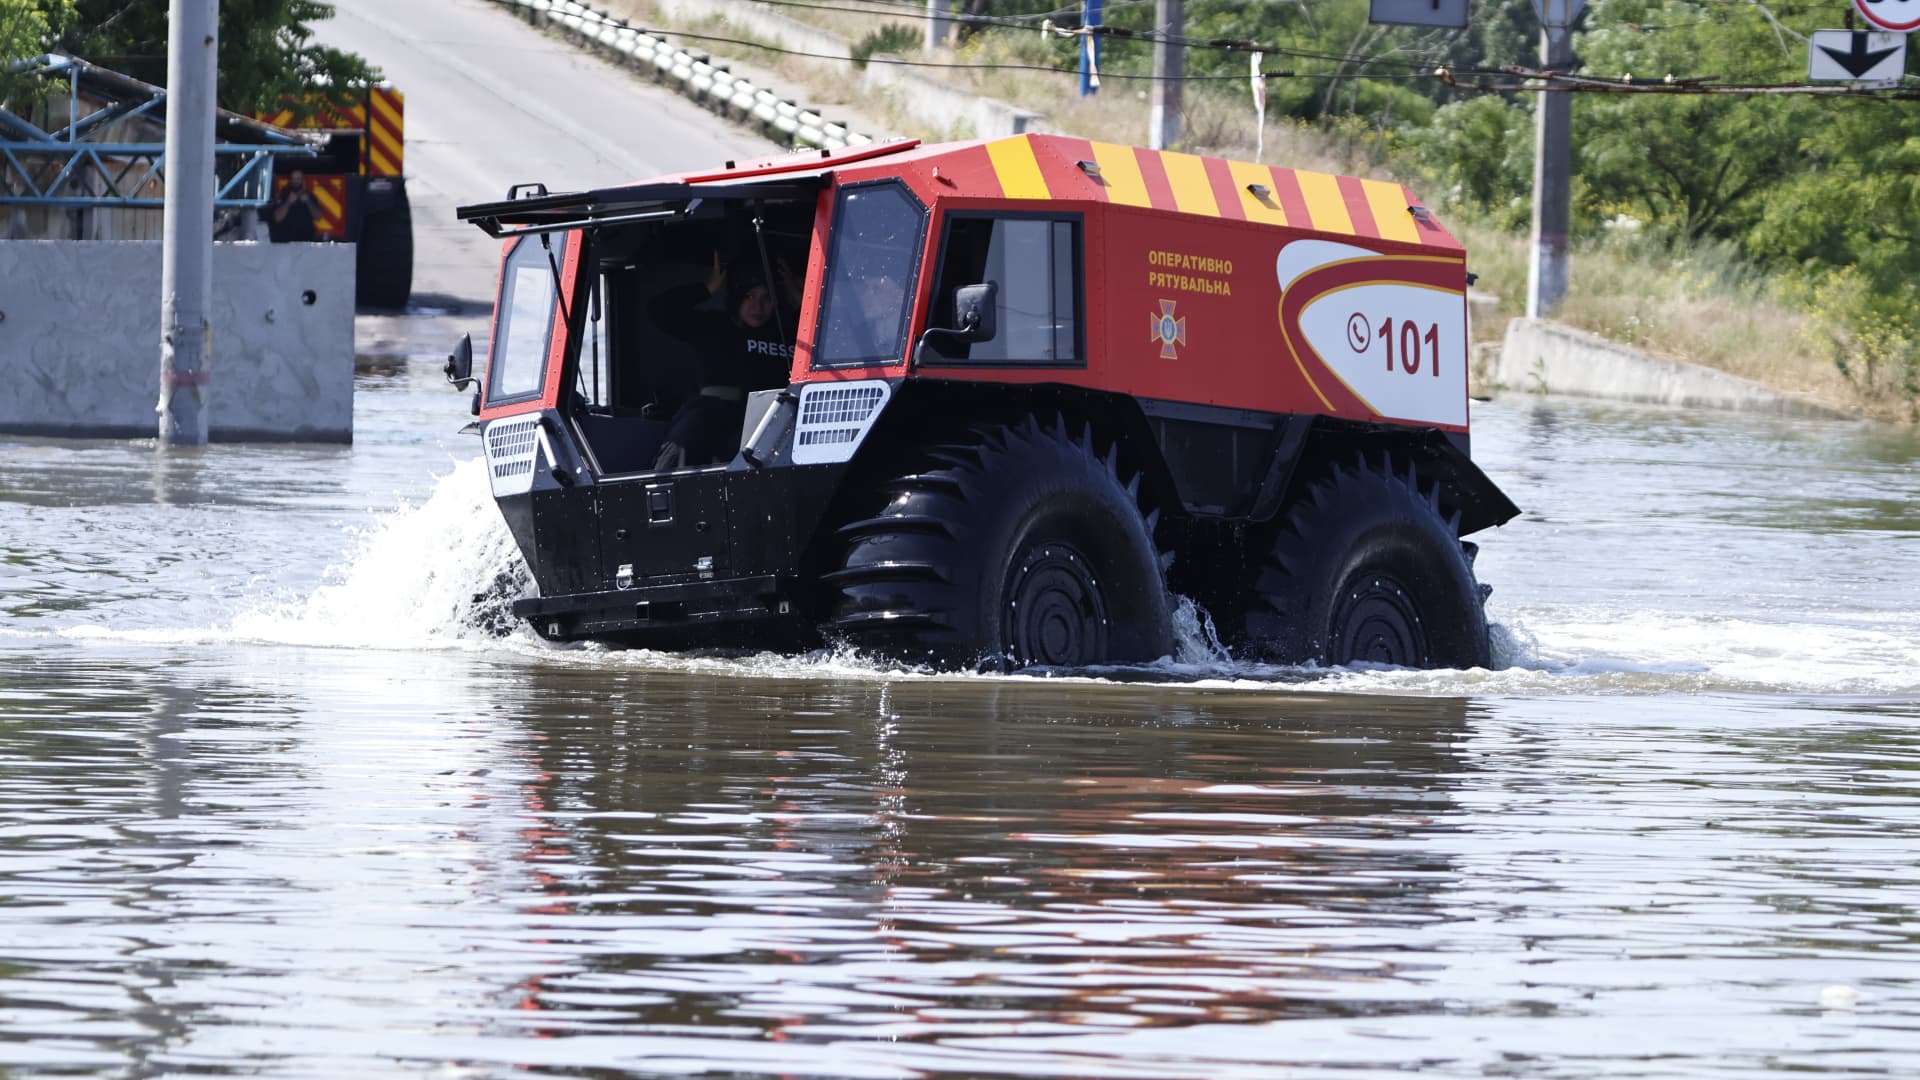 Rescuers ride in an amphibious all-terrain vehicle during evacuation in the flooded area of the city on June 7, 2023 in Kherson, Ukraine.